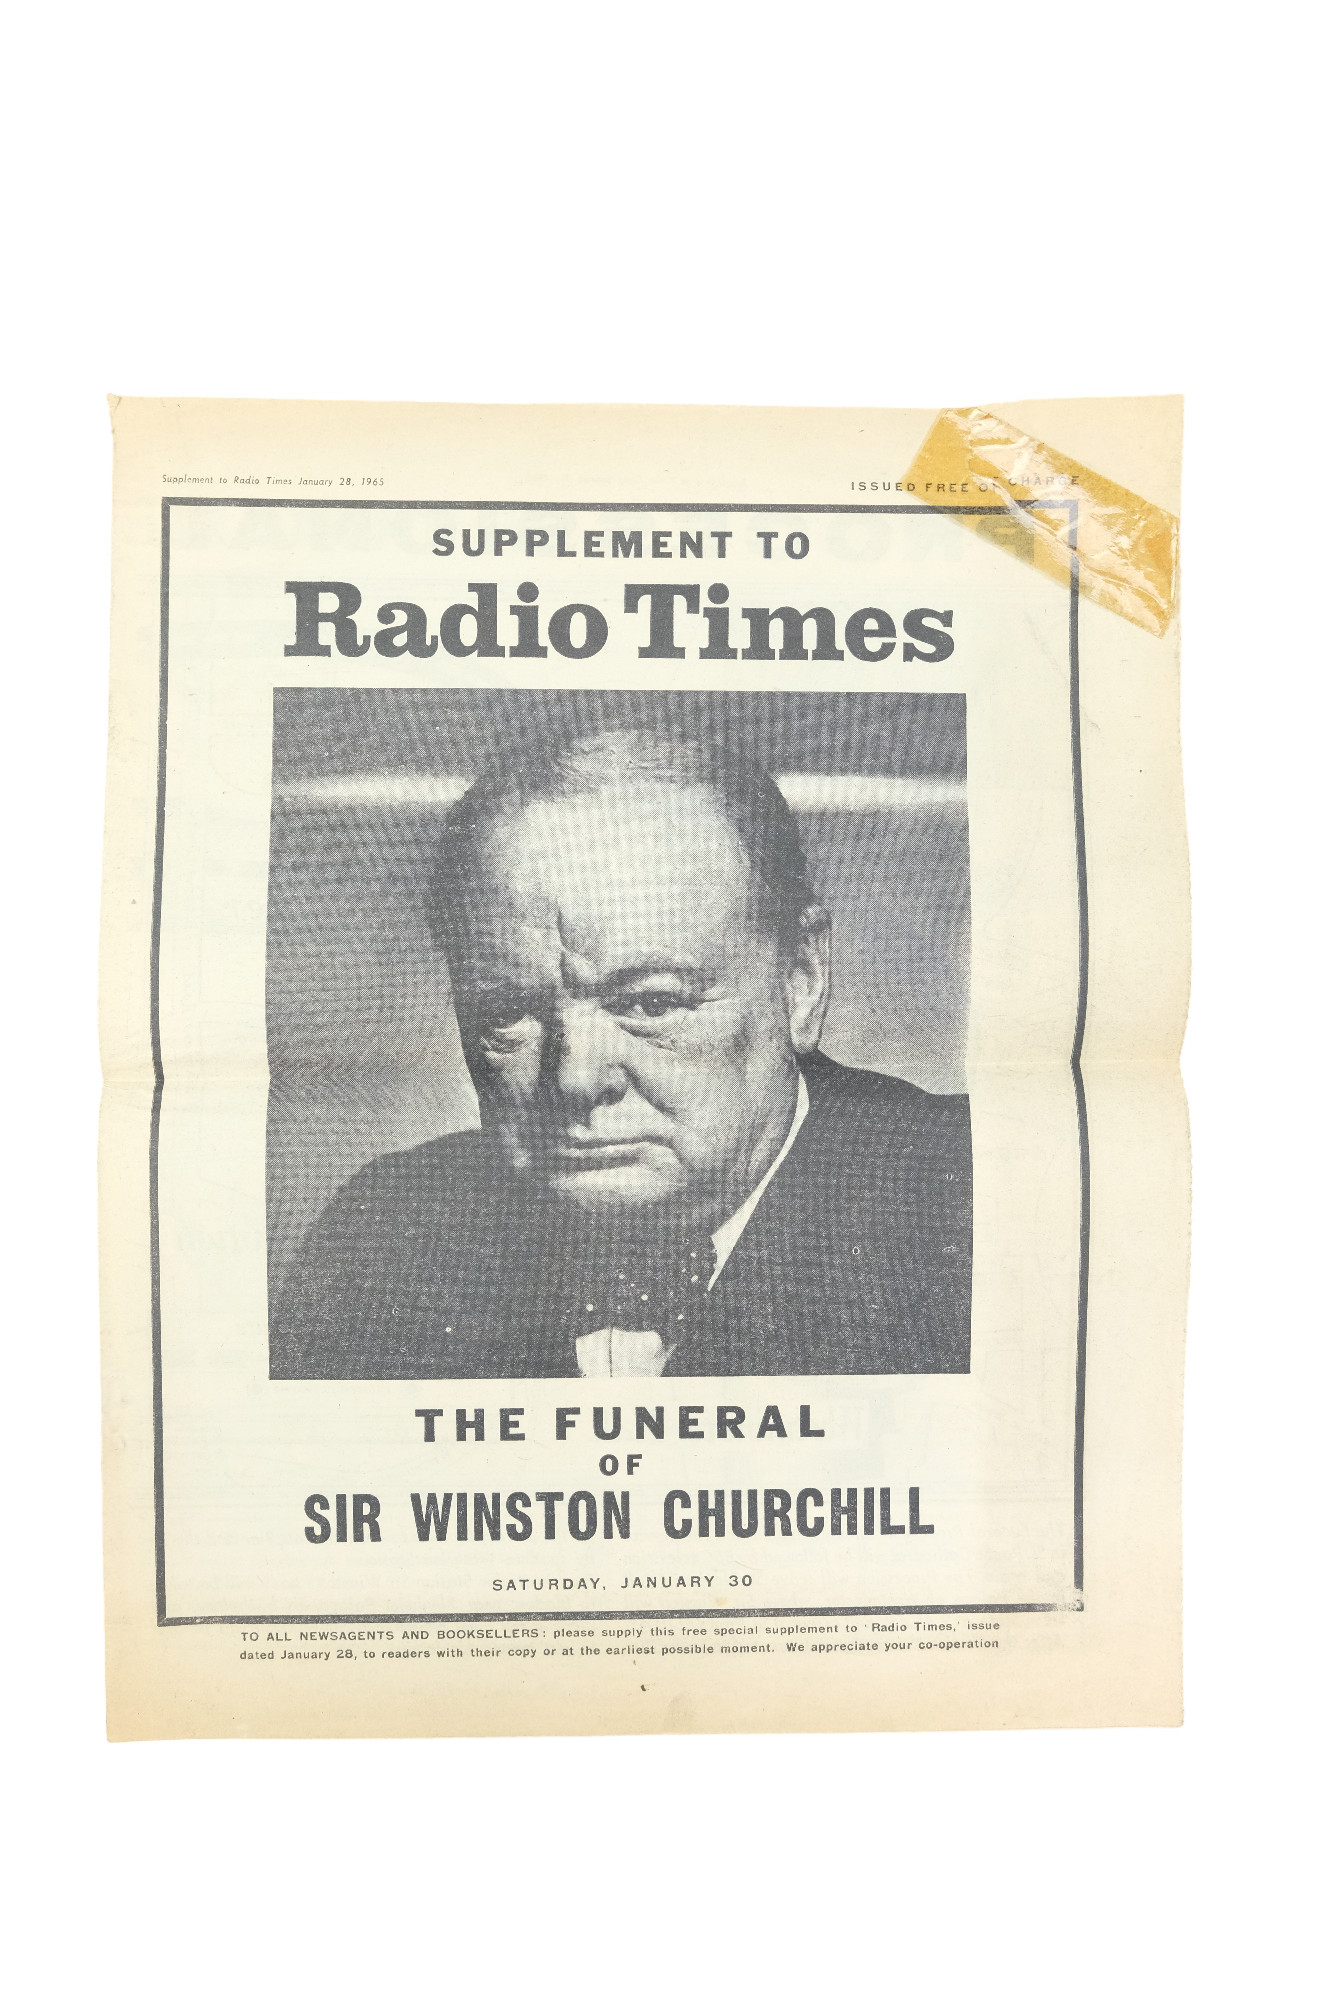 A Daily Express newspaper detailing "The Death of Churchill", dated Monday January 25, 1965, - Image 4 of 4